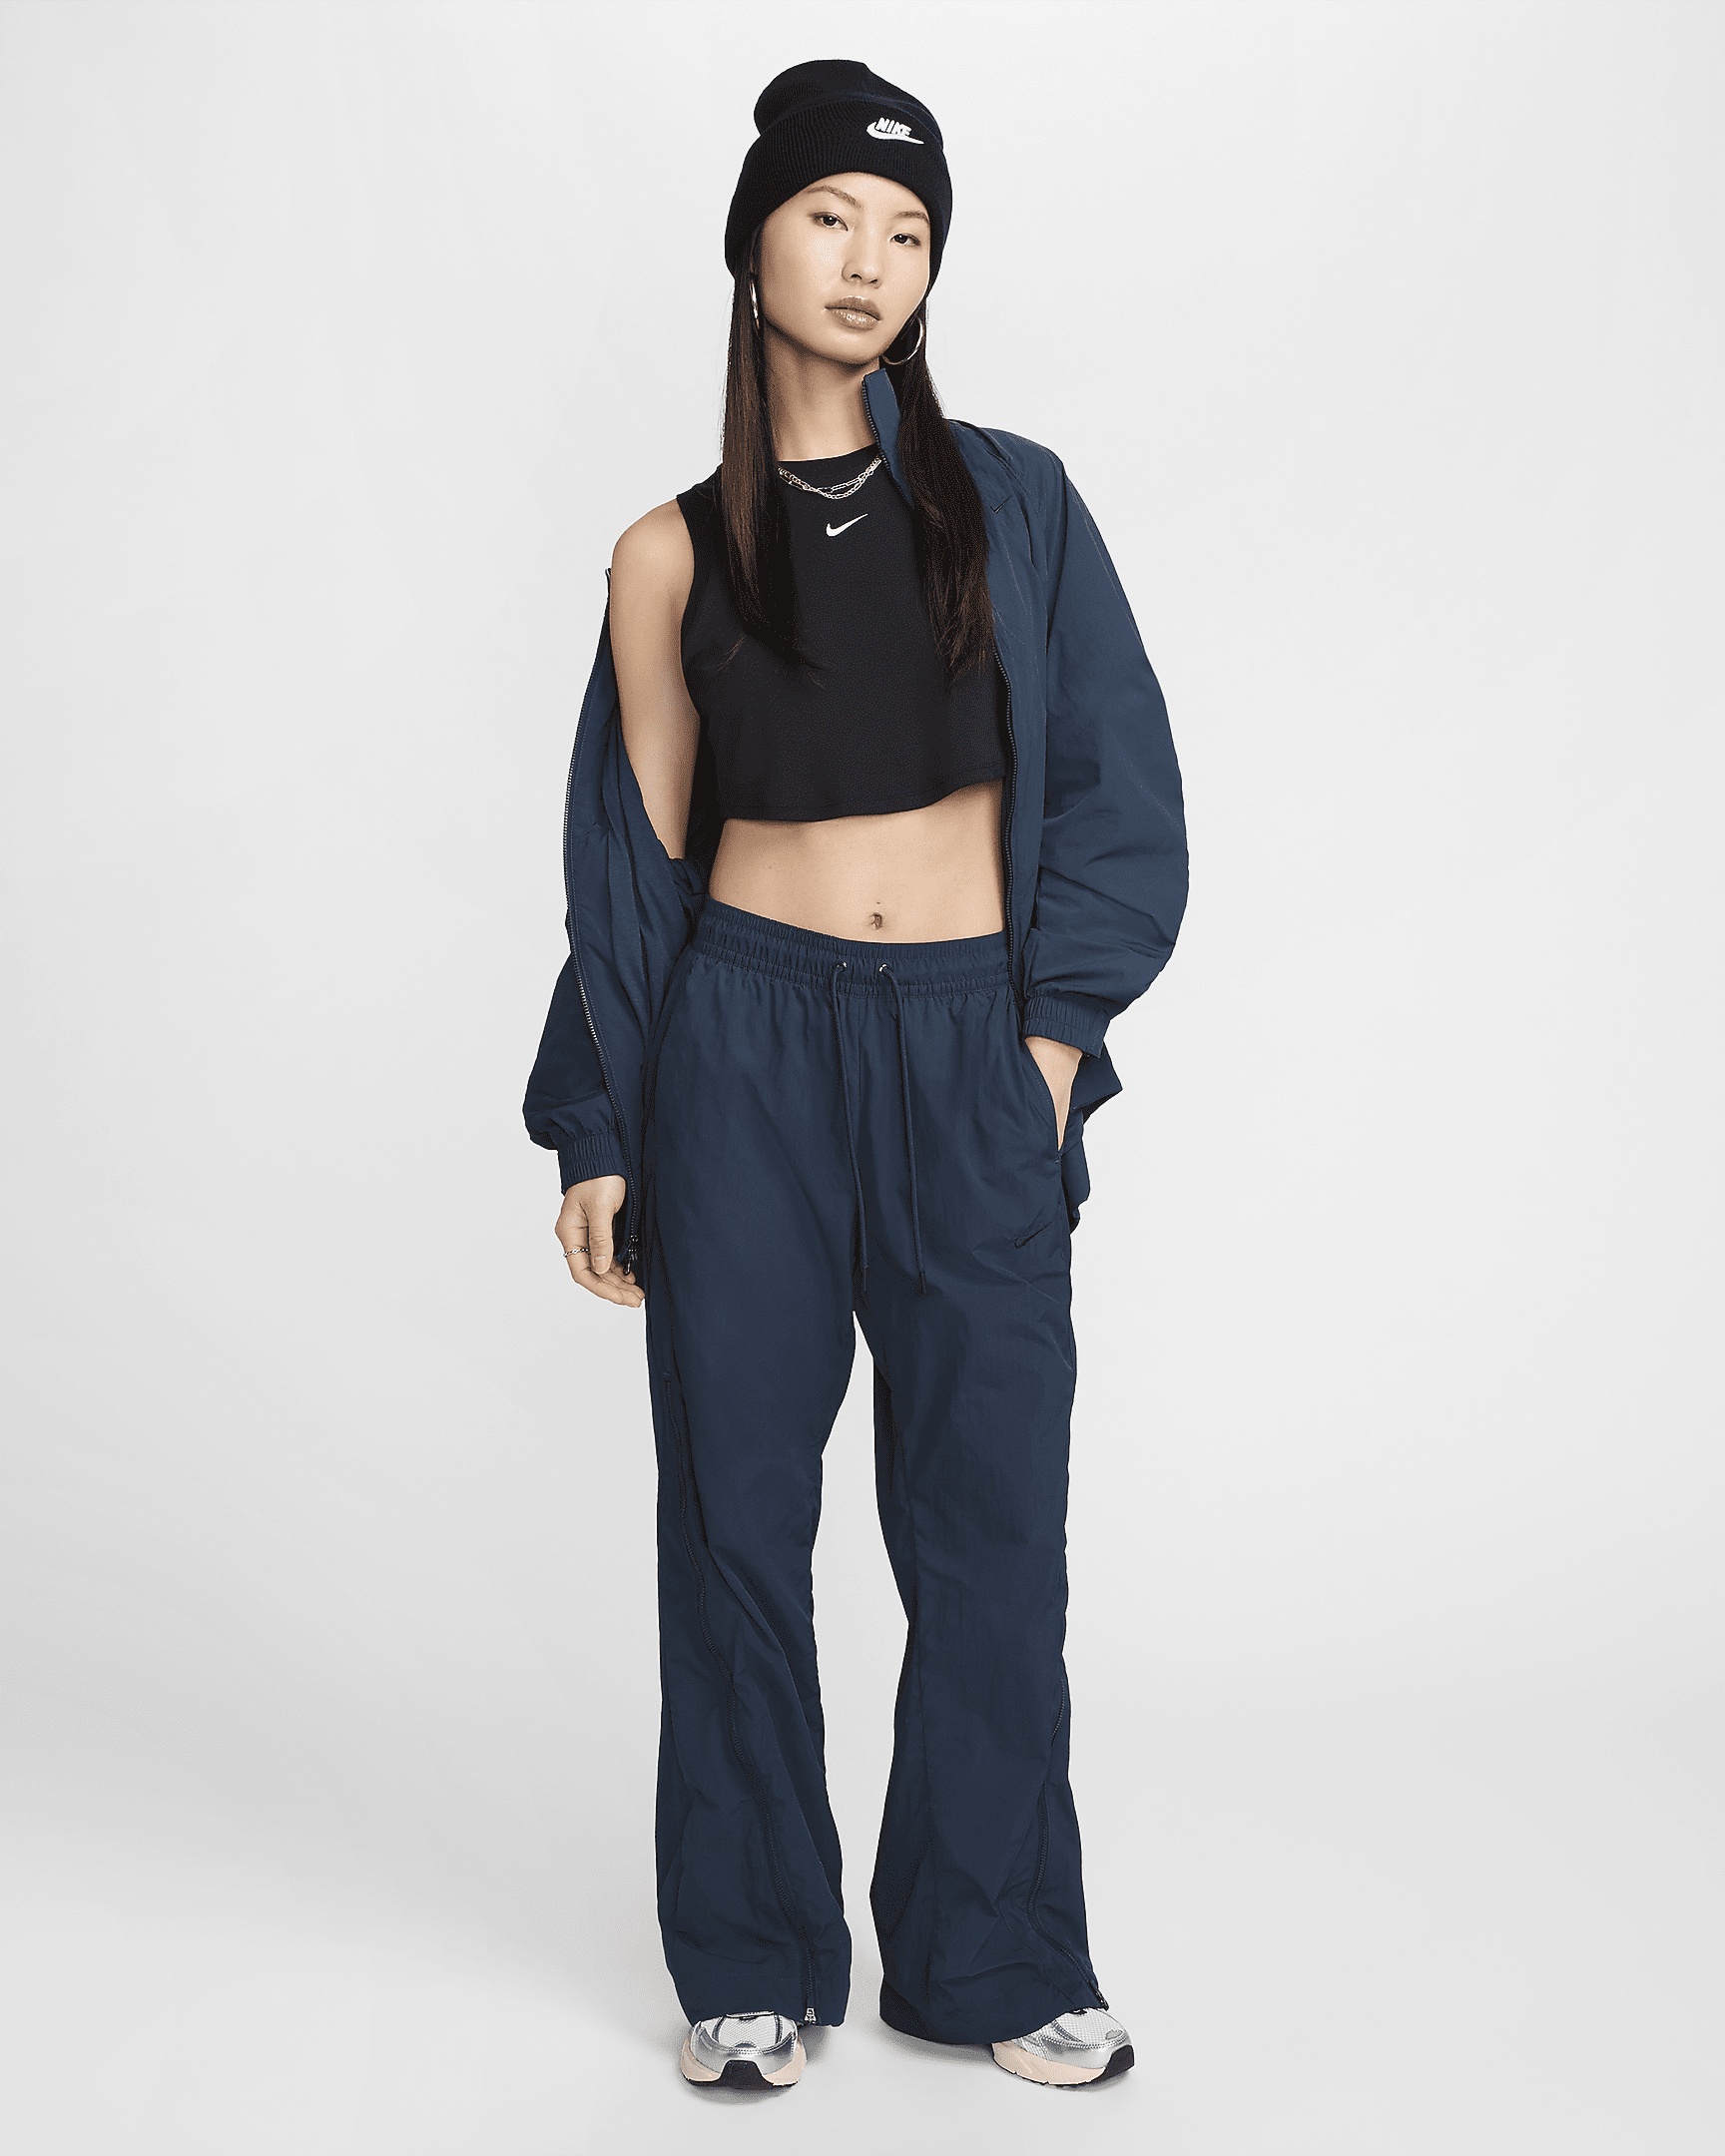 Women's Nike Sportswear Collection Mid-Rise Repel Zip Pants - 6